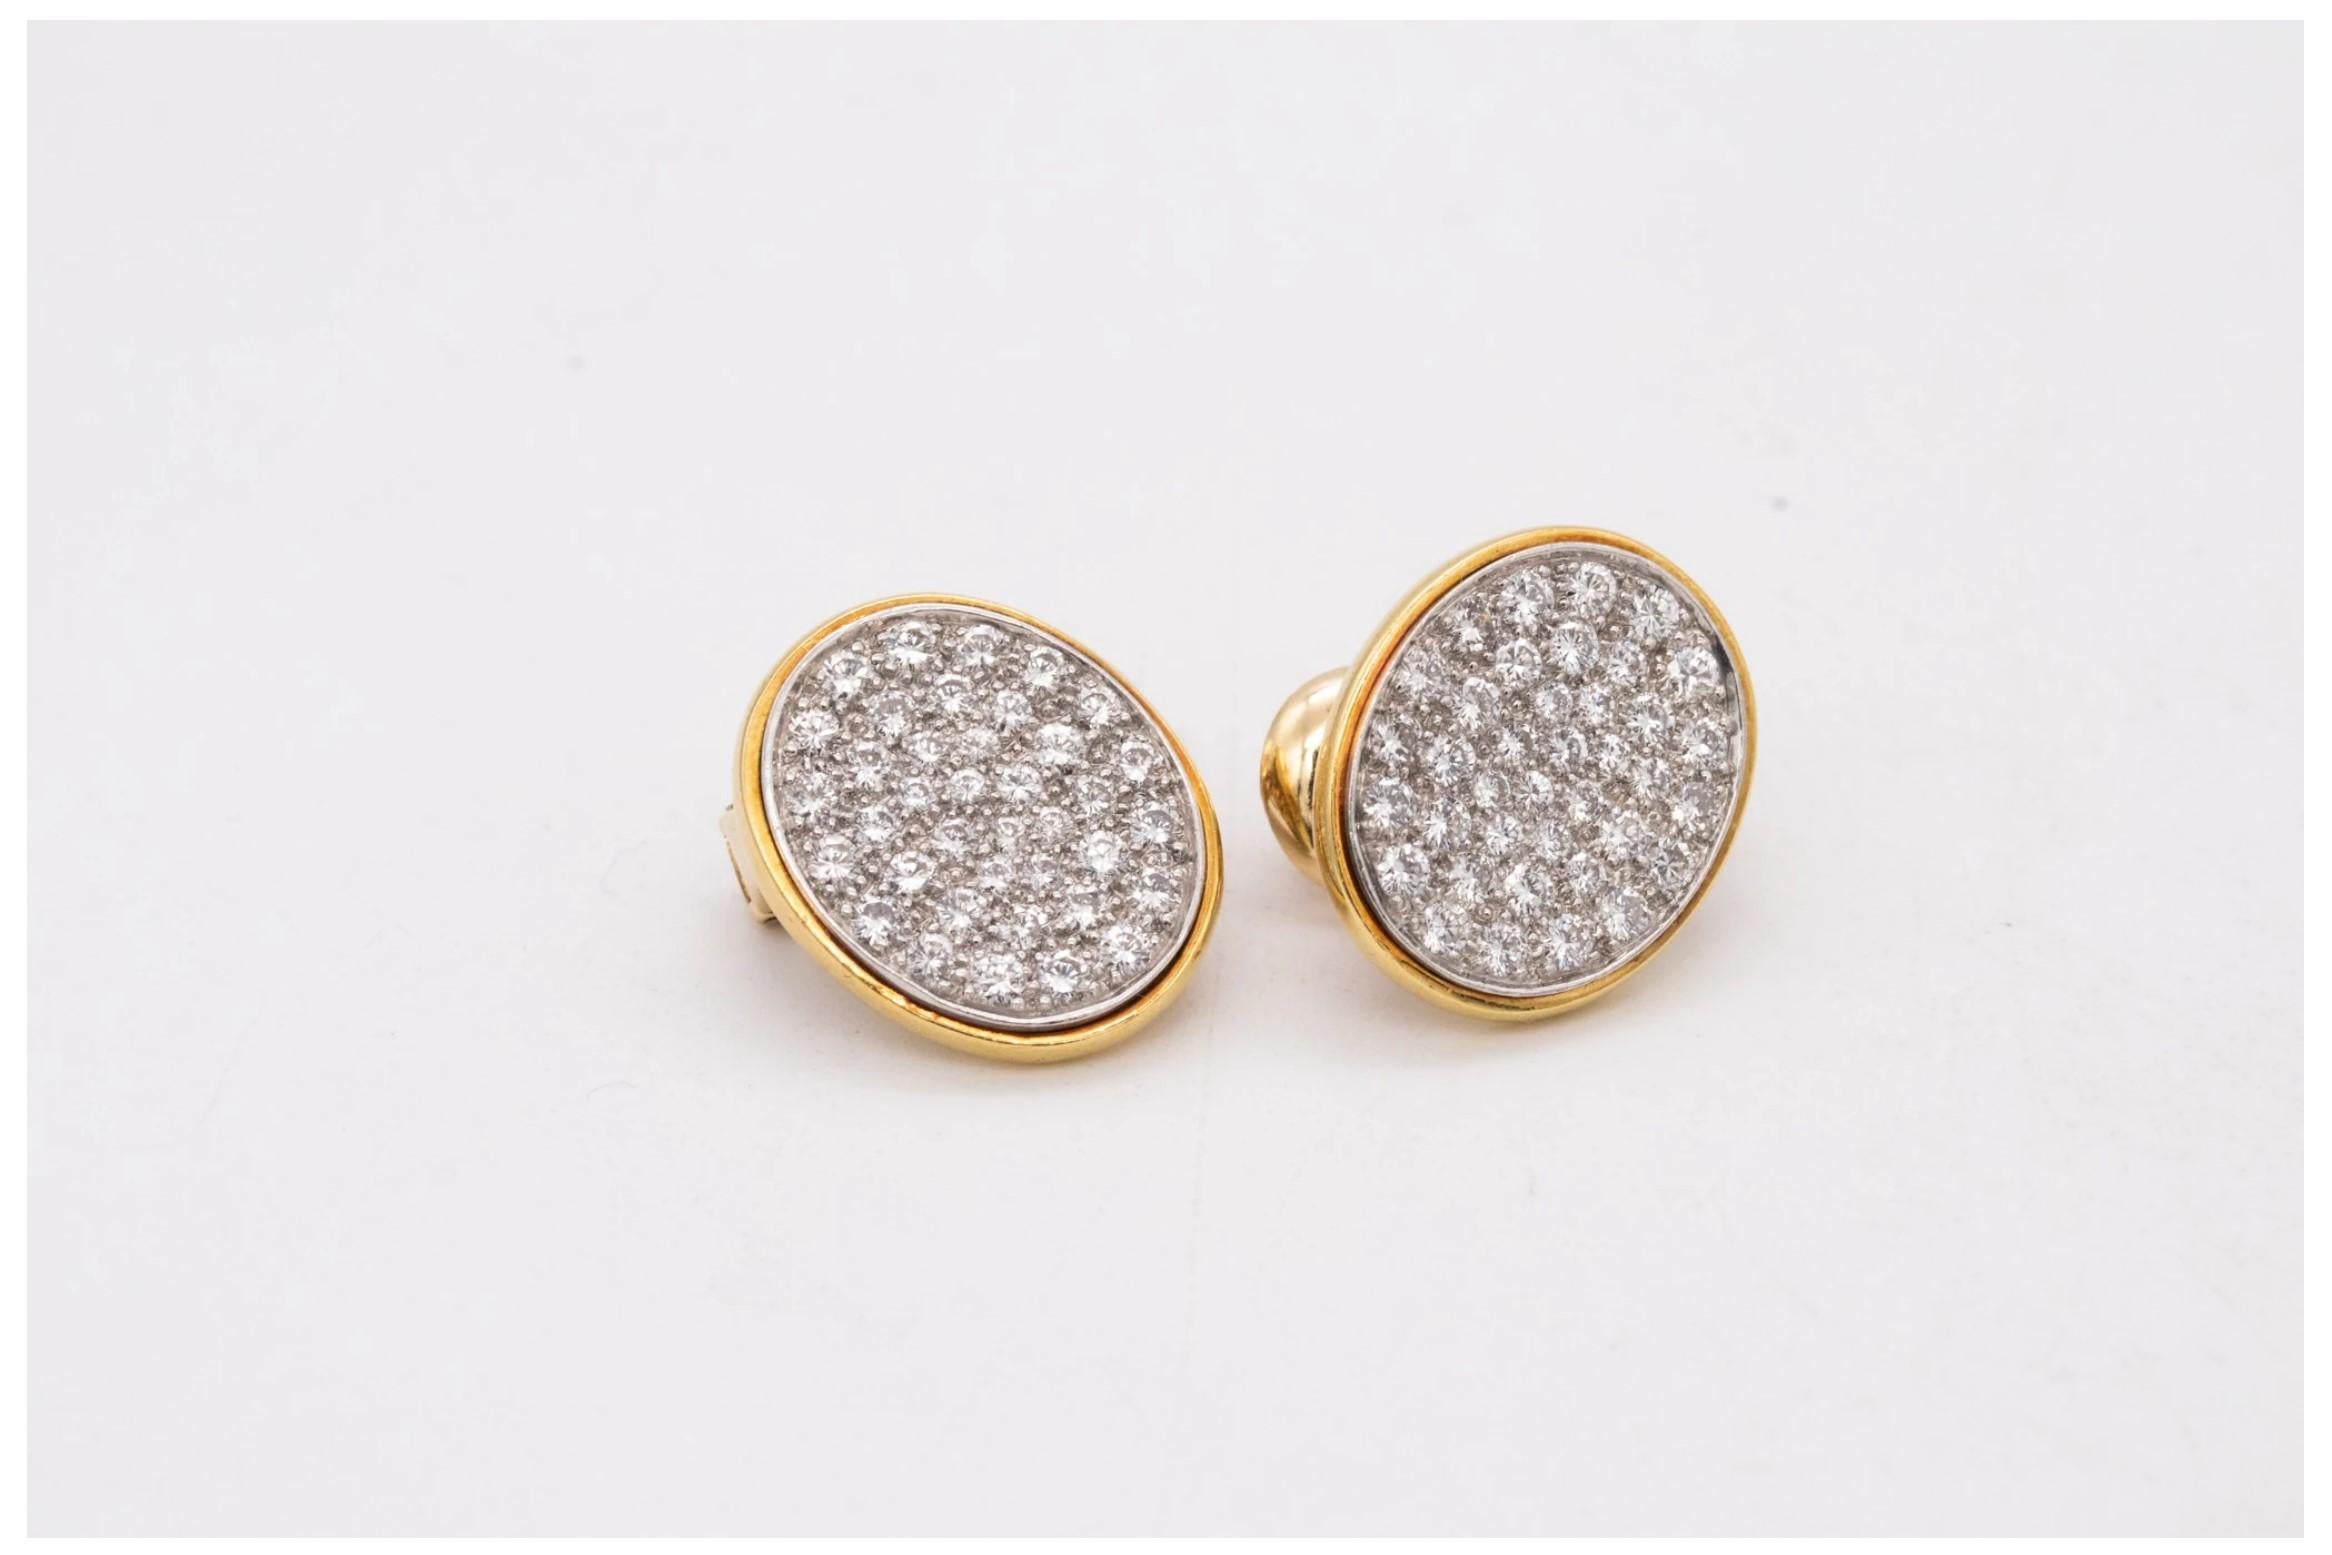 Oval shaped earrings designed by Dinh Van for Cartier.

Very rare vintage pieces made in Paris, France at the end of the 1960's. This earrings was crafted in 18 karats yellow gold and .900/.999 platinum. They are suited at the reverse, with